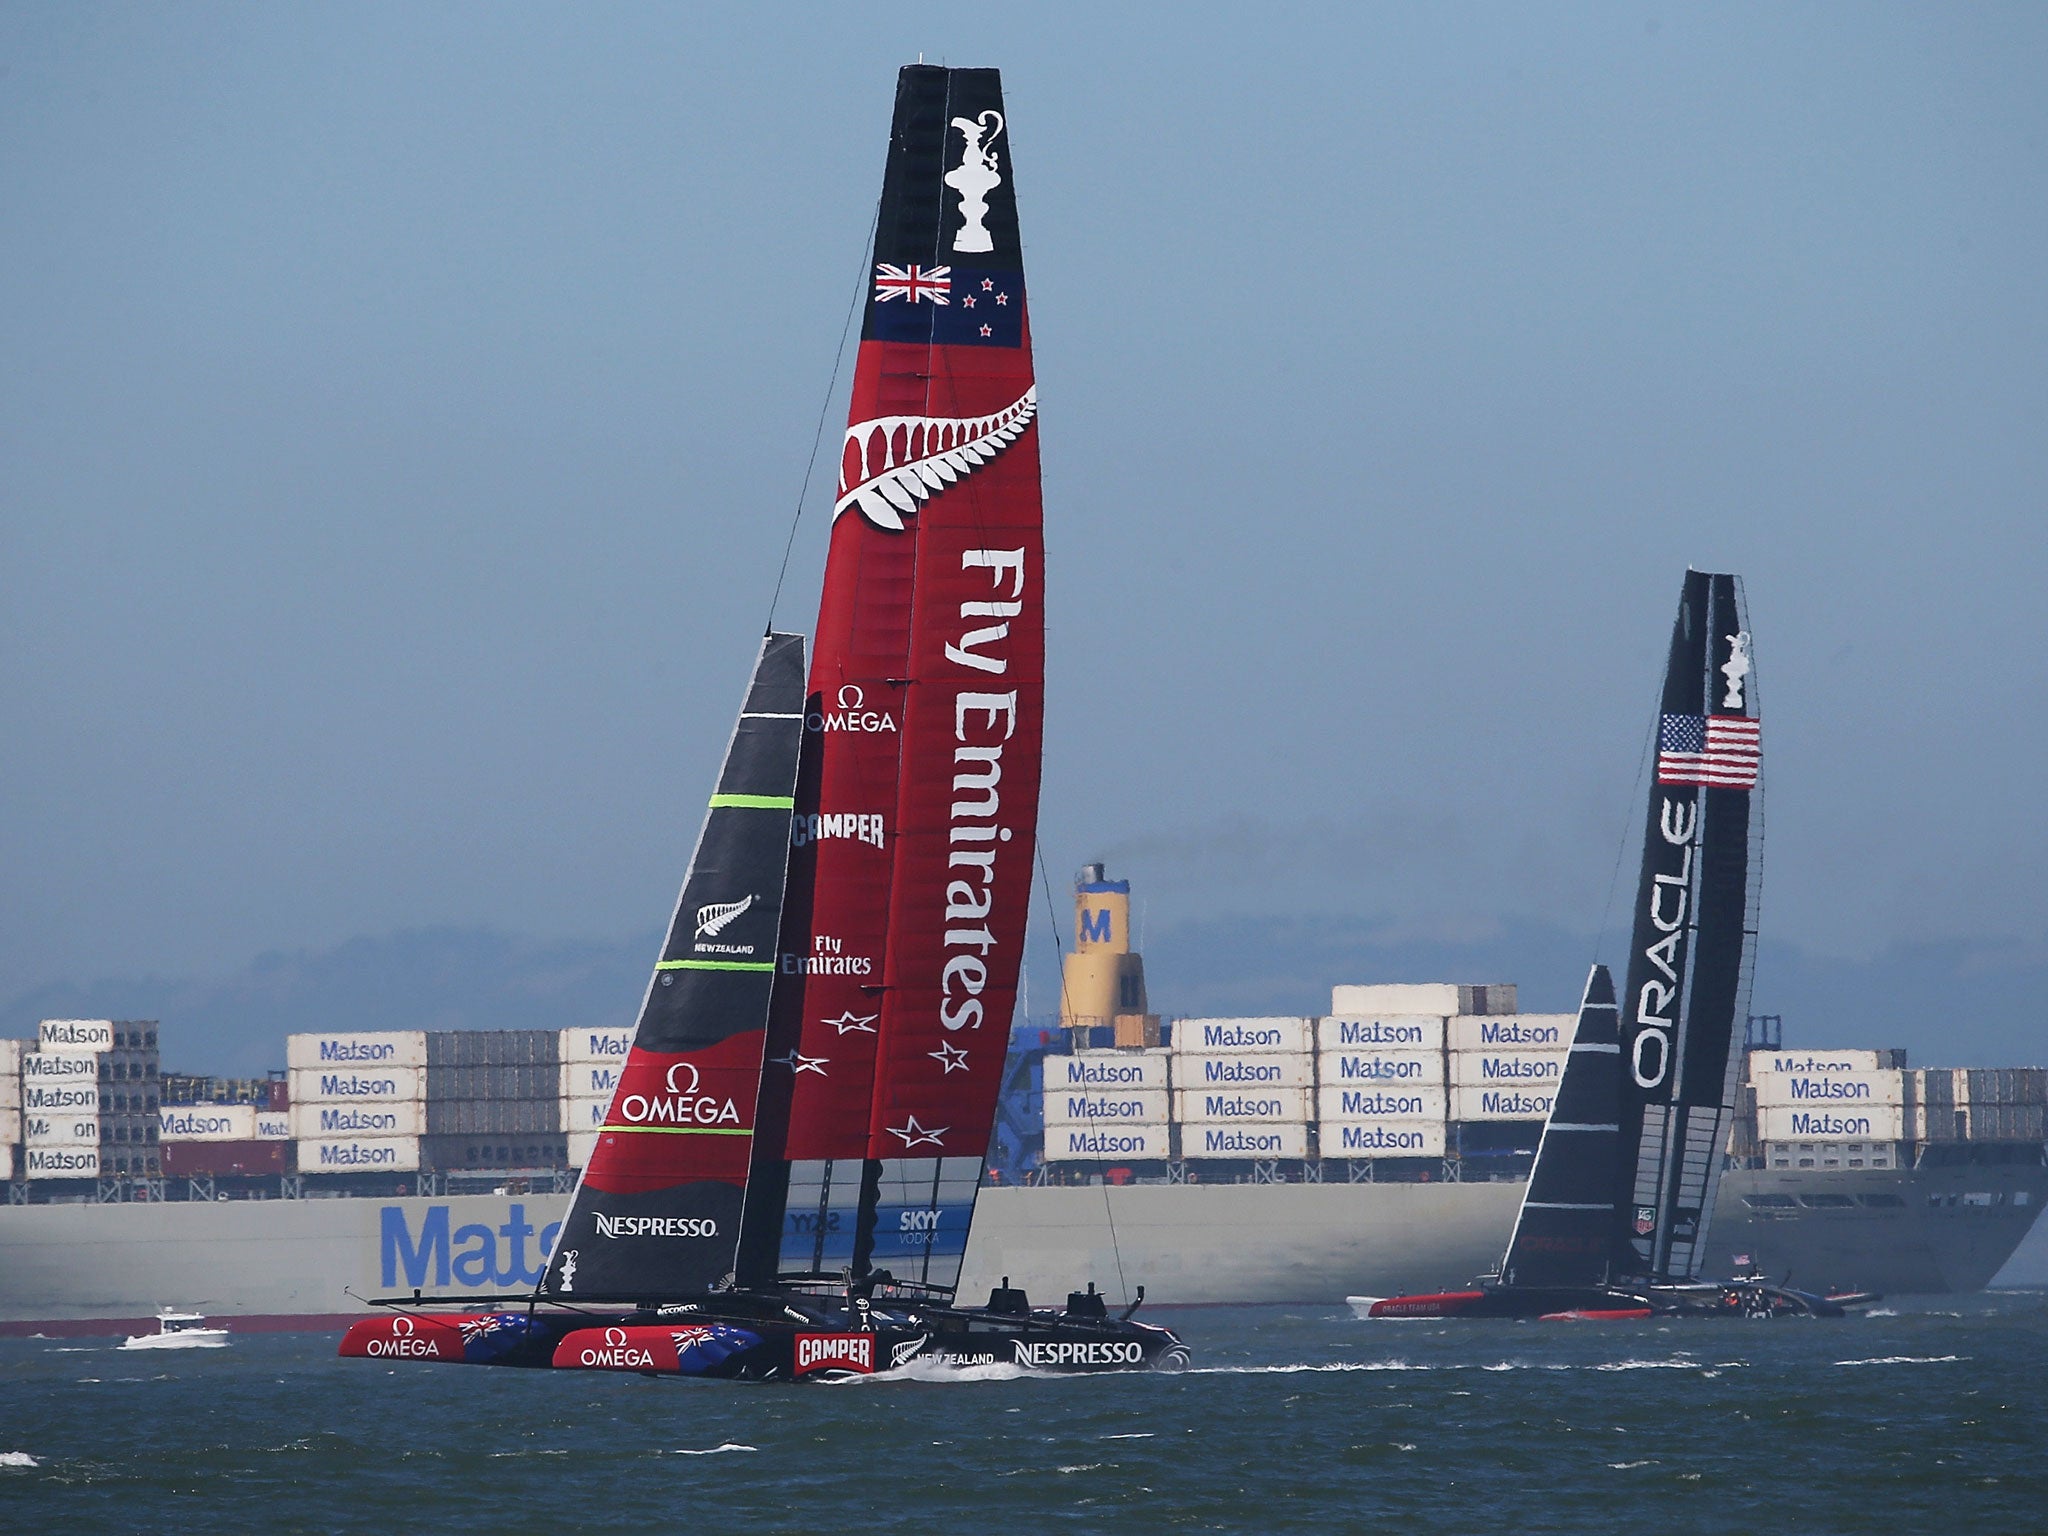 Oracle Team USA skippered James Spithill (R) in action against Emirates Team New Zealand skippered Dean Barker (L) during race twelve of the America's Cup finals